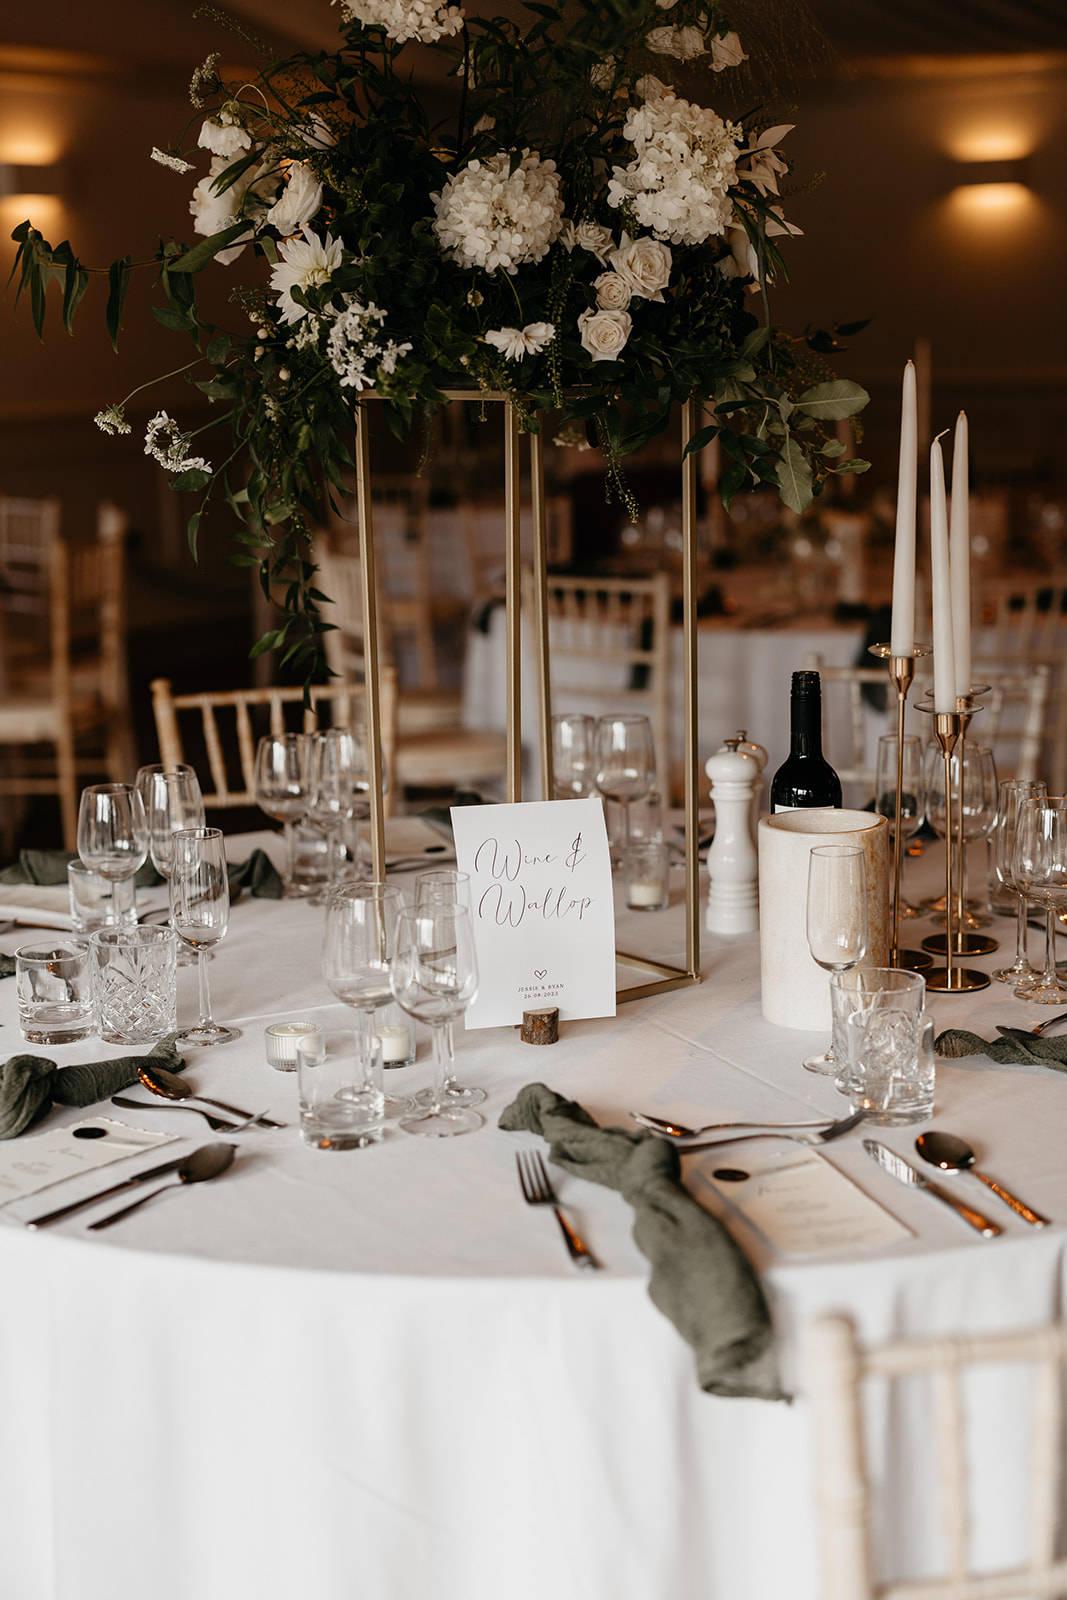 A white and green themed wedding reception table that has sage green linen napkins, cut glassware and elevated floral centrepieces with white candles